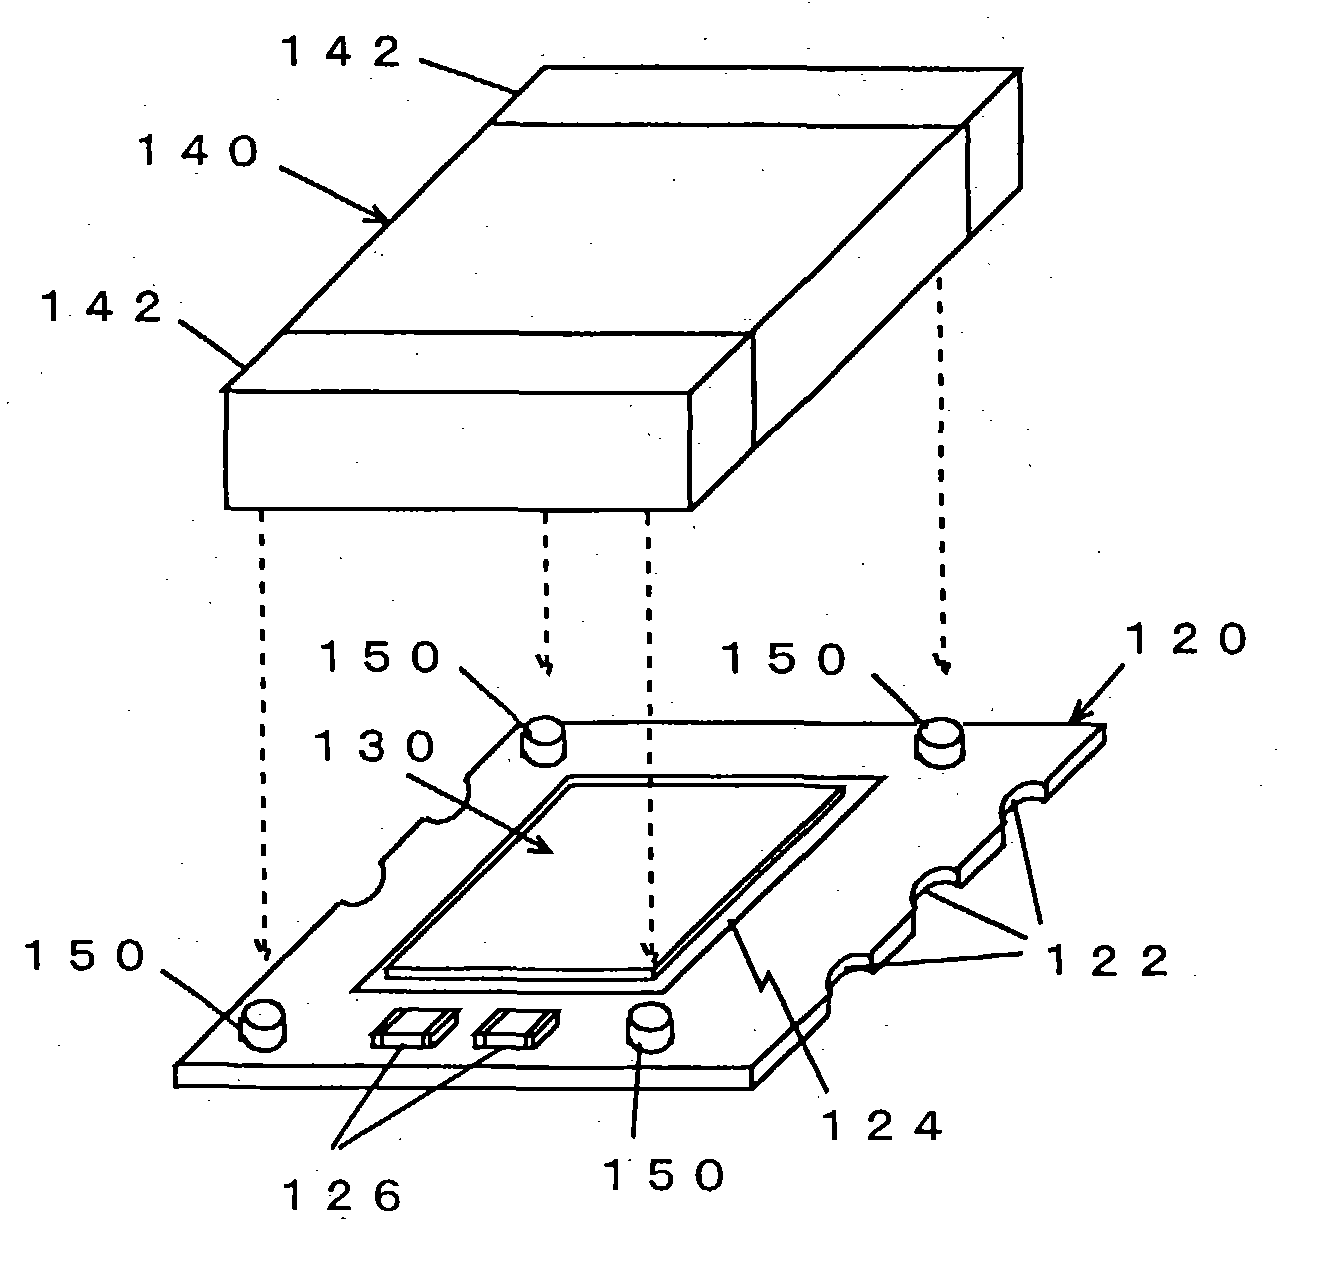 Microconverter and laminated magnetic-core inductor